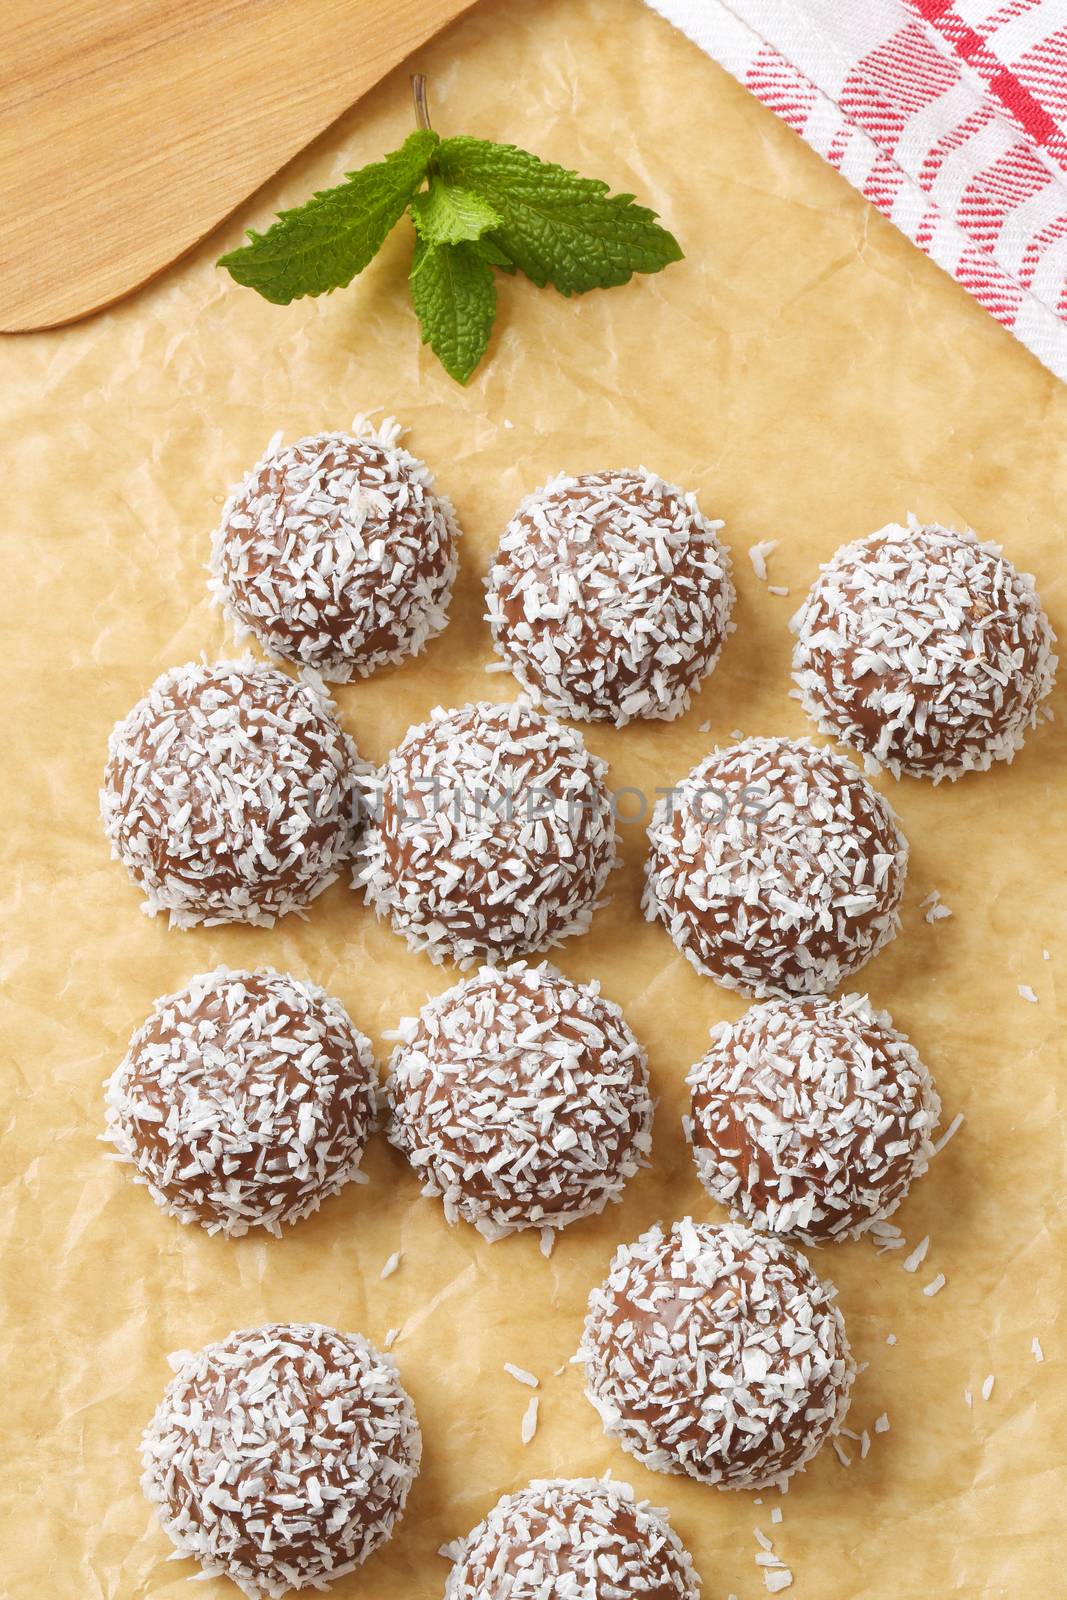 Chocolate coconut snowball cookies by Digifoodstock